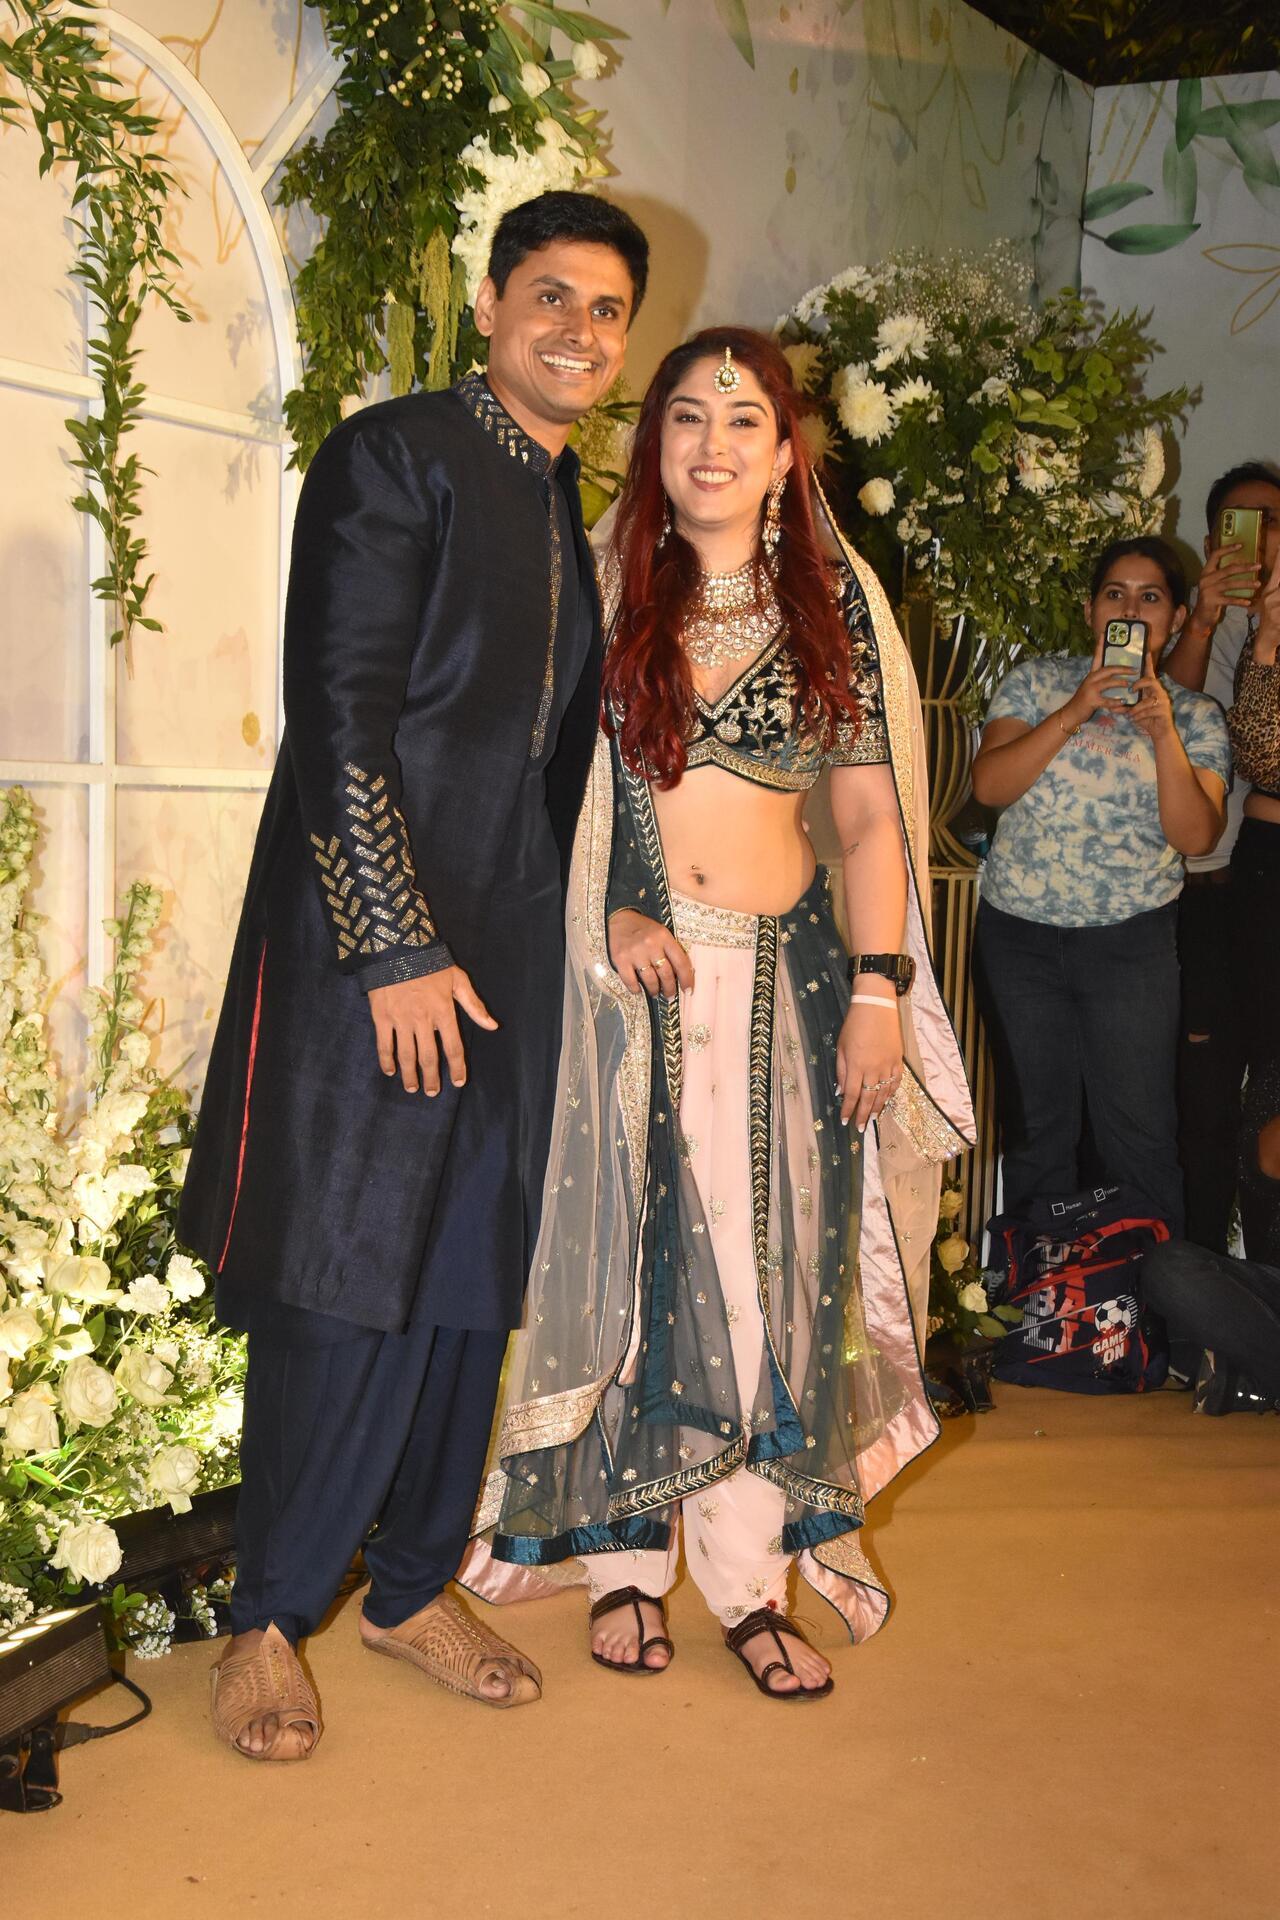 Ira looked gorgeous in a deep-cut choli with pink and green coloured dhoti pants. She elevated her wedding look with a stunning silver dupatta placed over her head. Nupur wore a blue bandhgala suit